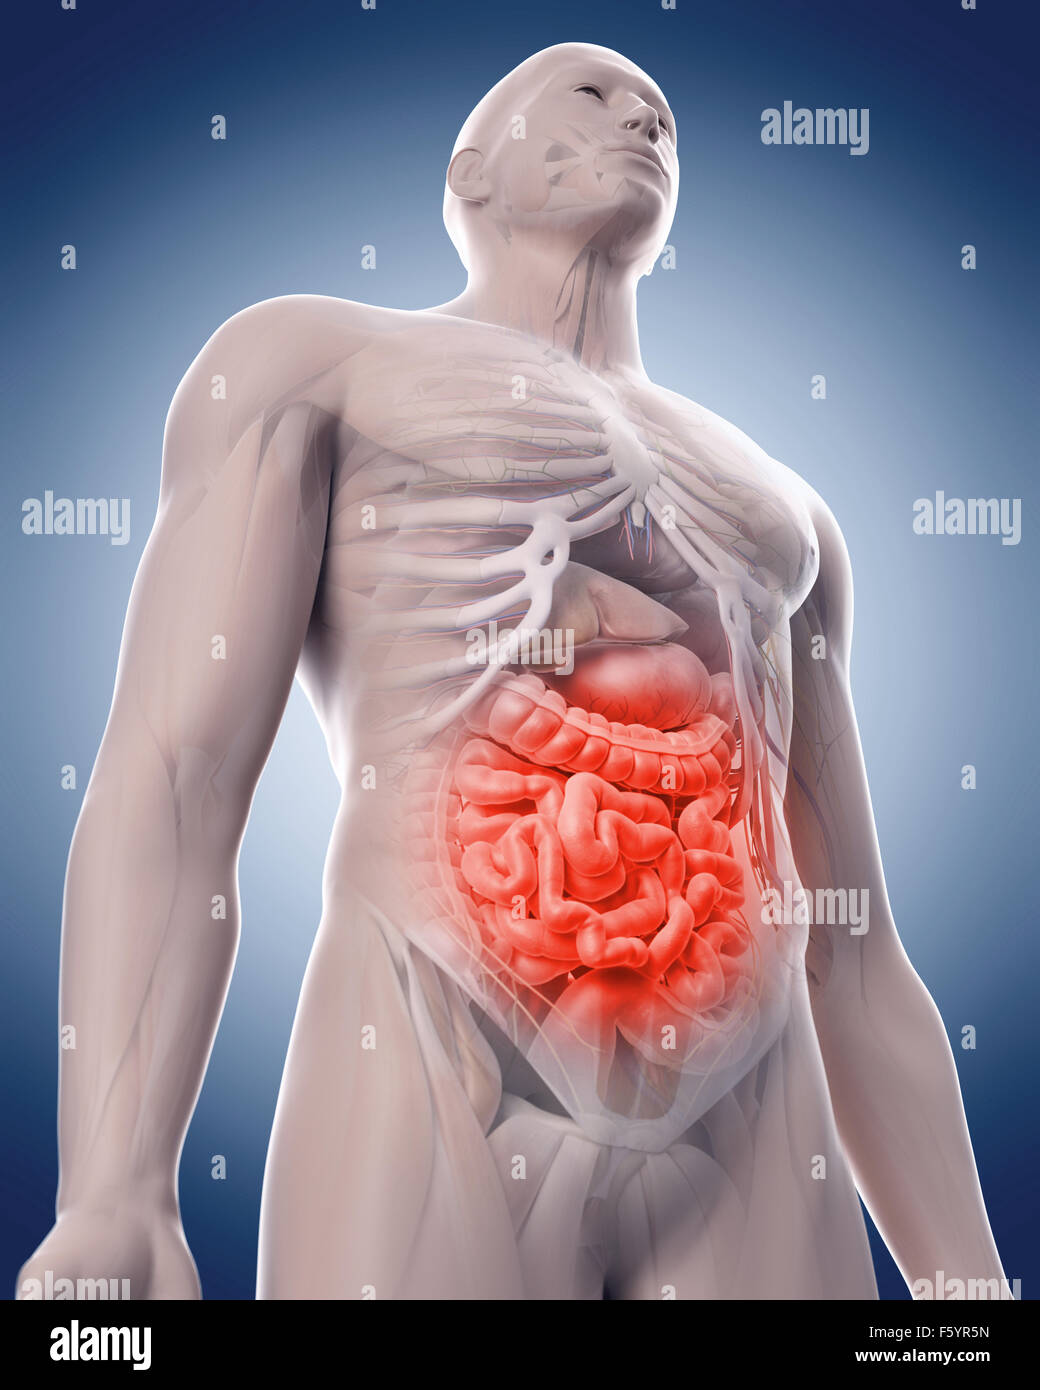 medical 3d illustration of a painful intestine Stock Photo